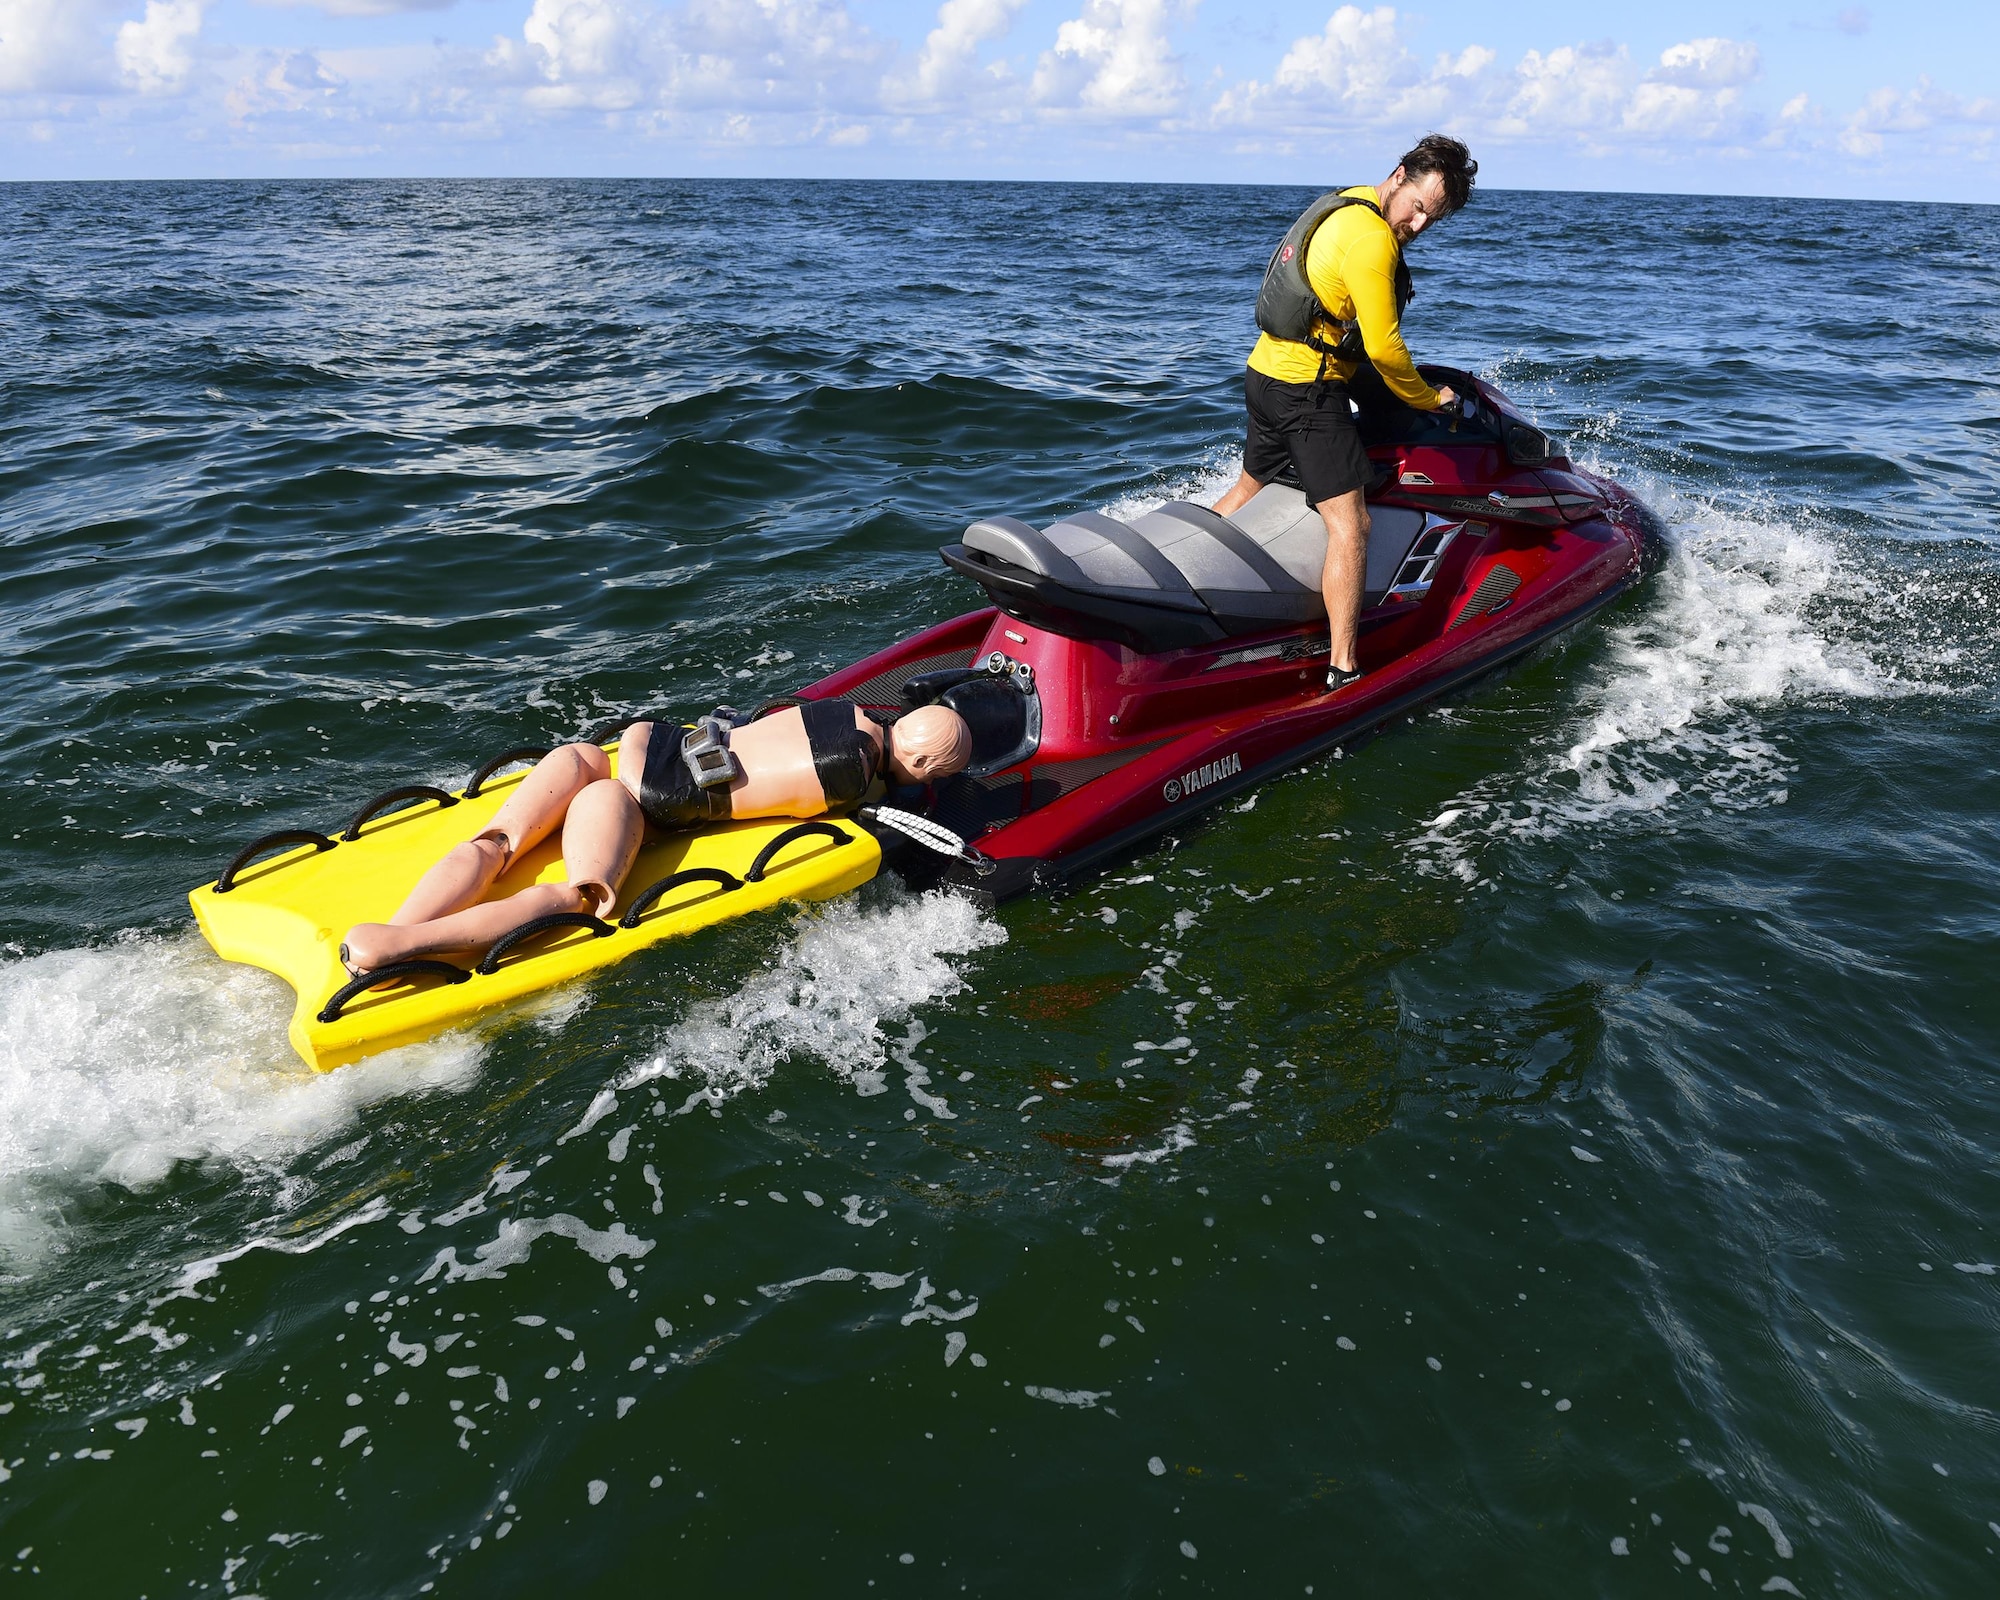 A Naval Diving and Salvage Training Center instructor transports a mannequin for a recovery exercise in the Gulf of Mexico, Aug. 15, 2017. The exercise involved dropping mannequins and ruck sacks to the bottom of the Gulf and the students pulling them out to simulate an underwater recovery mission.